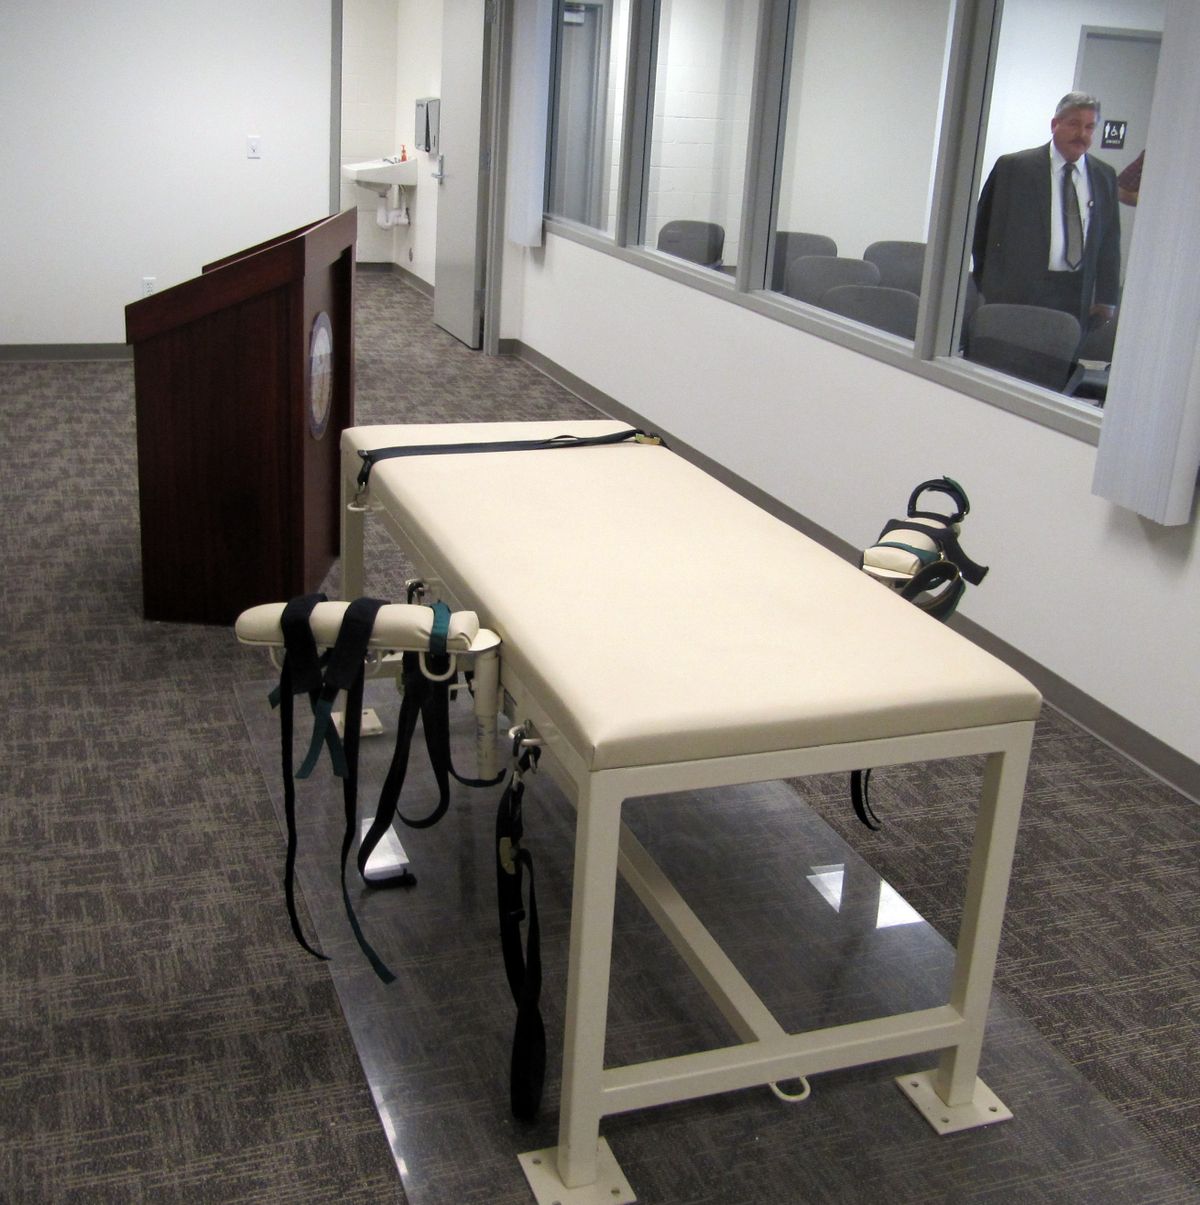 The execution chamber at the Idaho Maximum Security Institution in Boise is shown in late October, with Security Institution Warden Randy Blades looking in. Paul Ezra Rhoades, who was convicted of killing three people in Idaho Falls and Blackfoot in 1987, is scheduled to be executed by lethal injection Friday. (Associated Press)